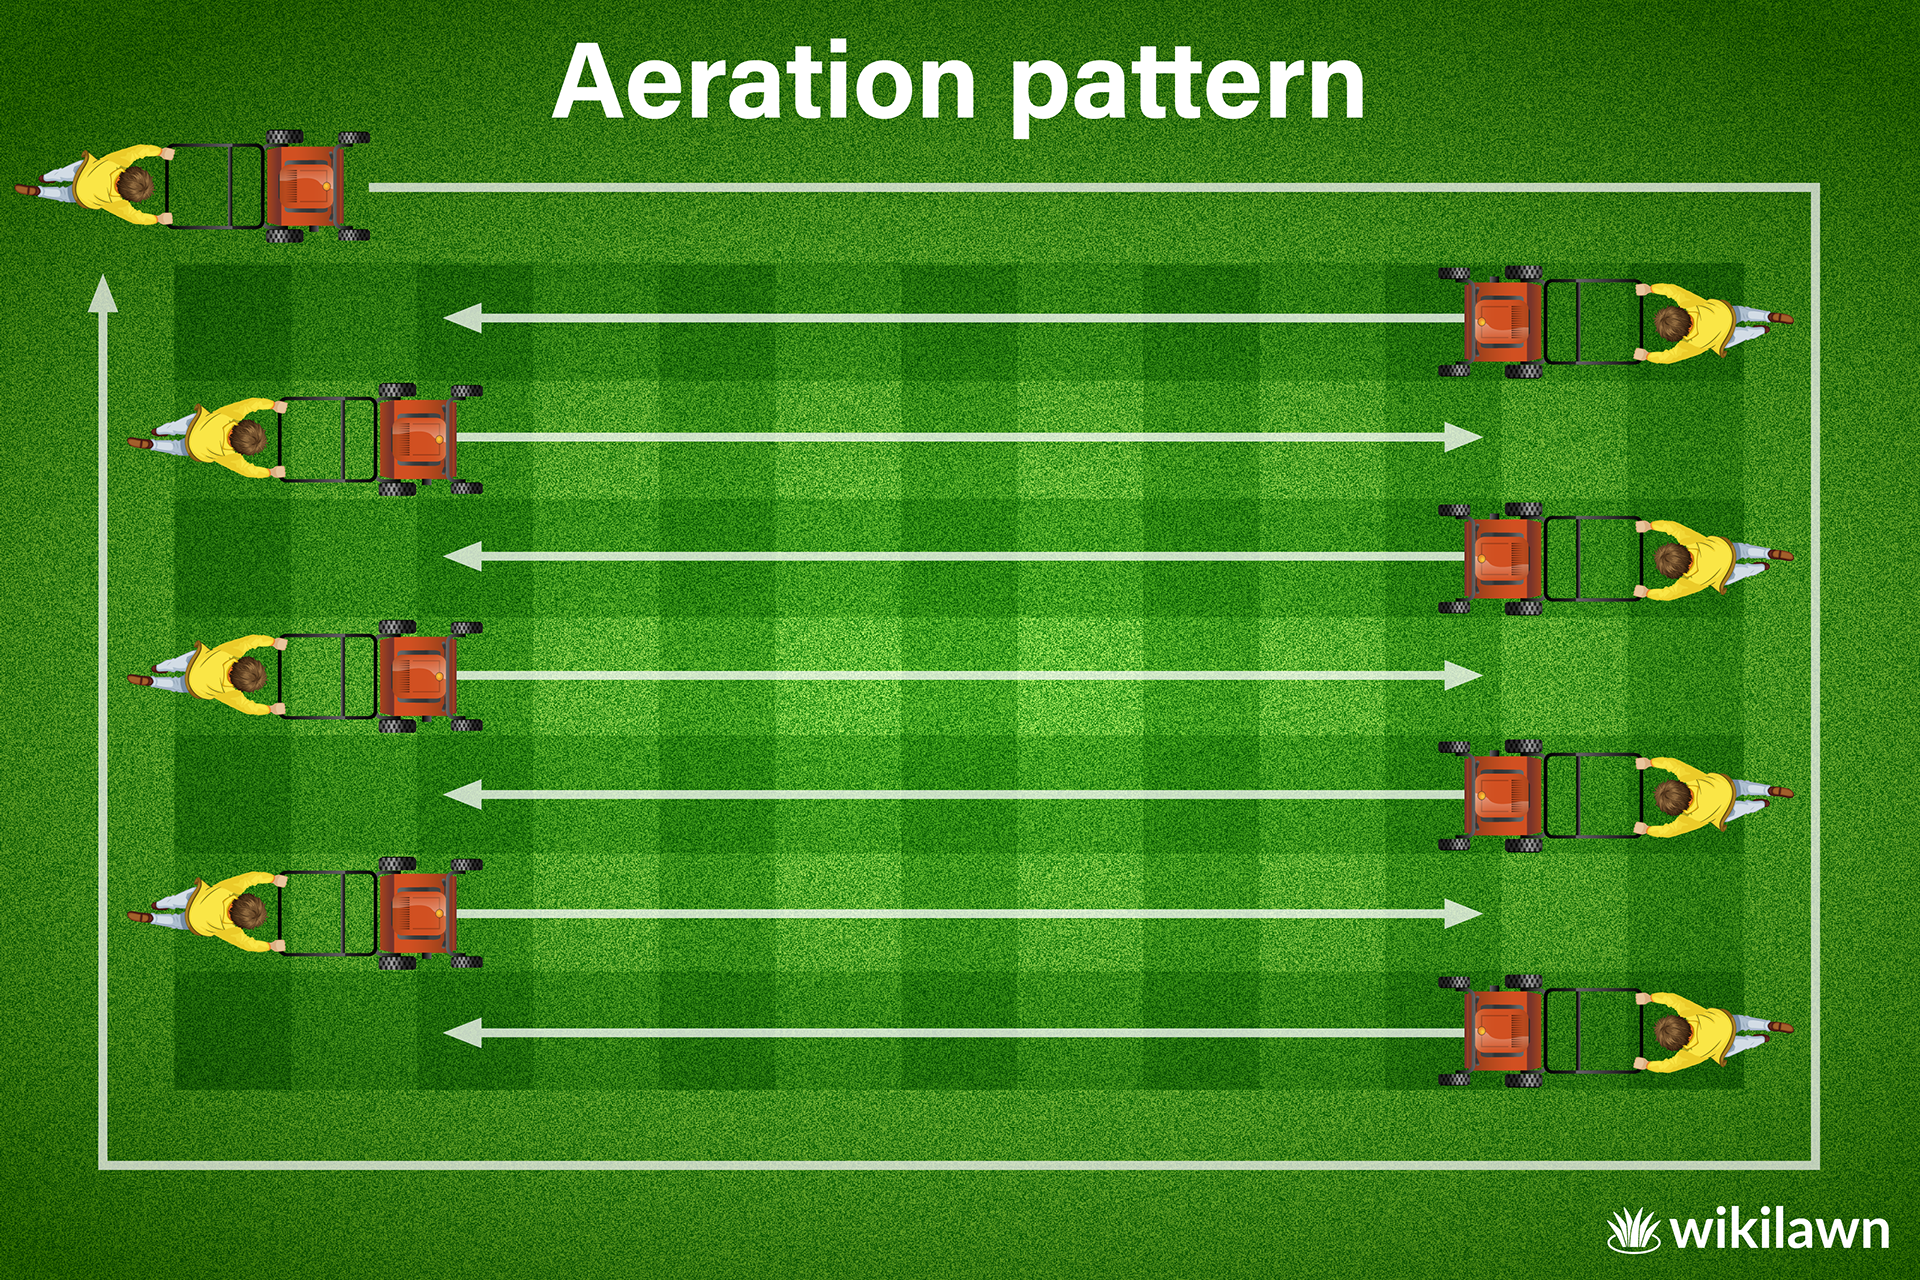 illustration of a person walking an aeration machine back and forth across the lawn in the proper aeration pattern